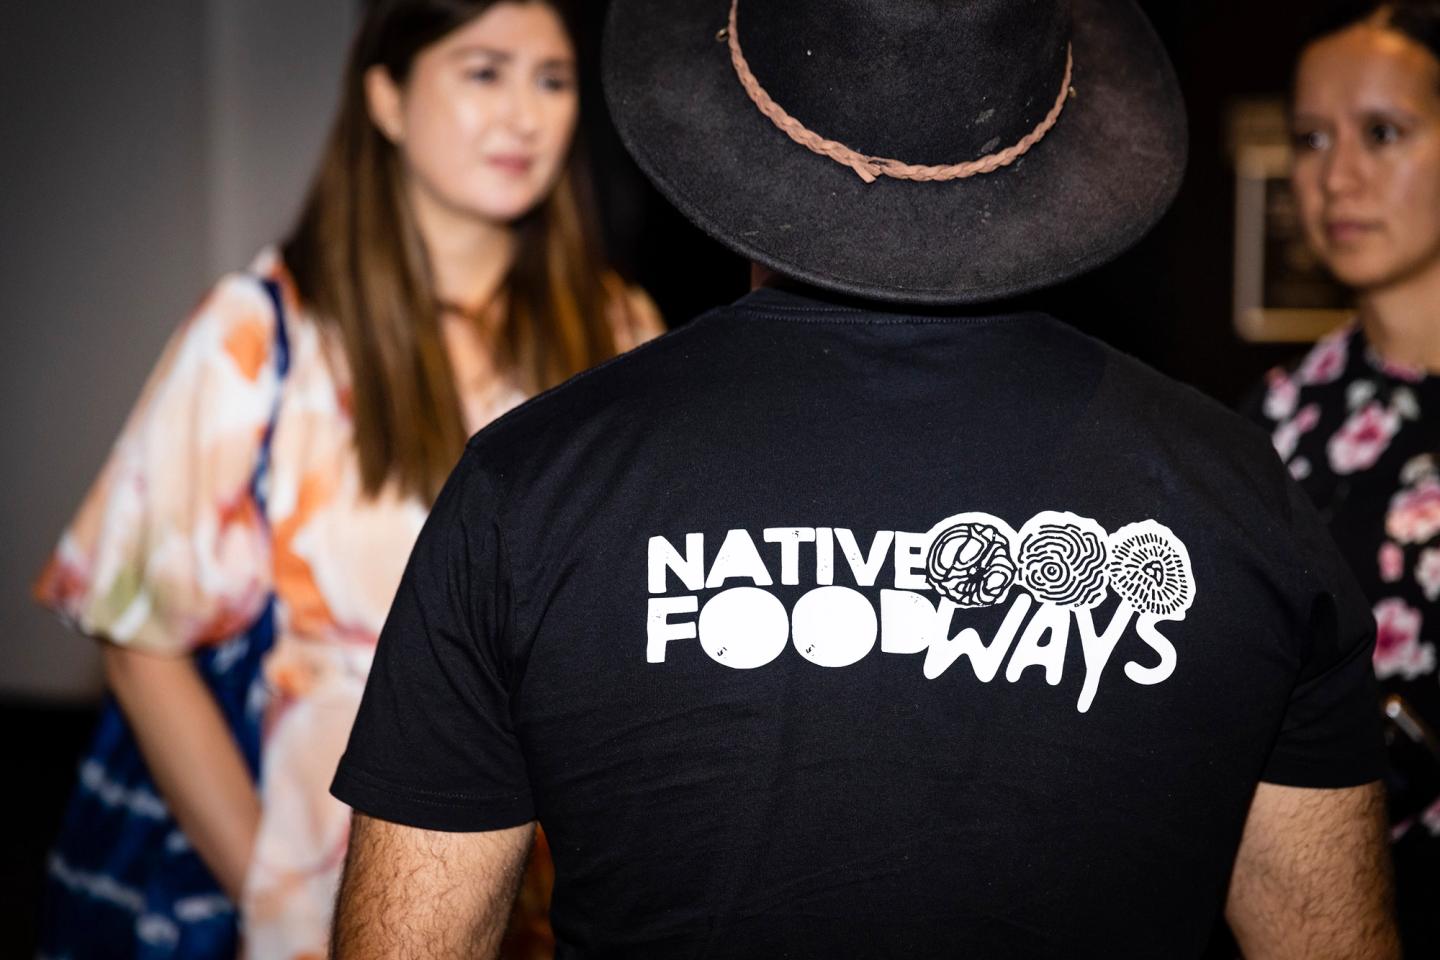 Black 'Native Foodways' t-shirt from the back